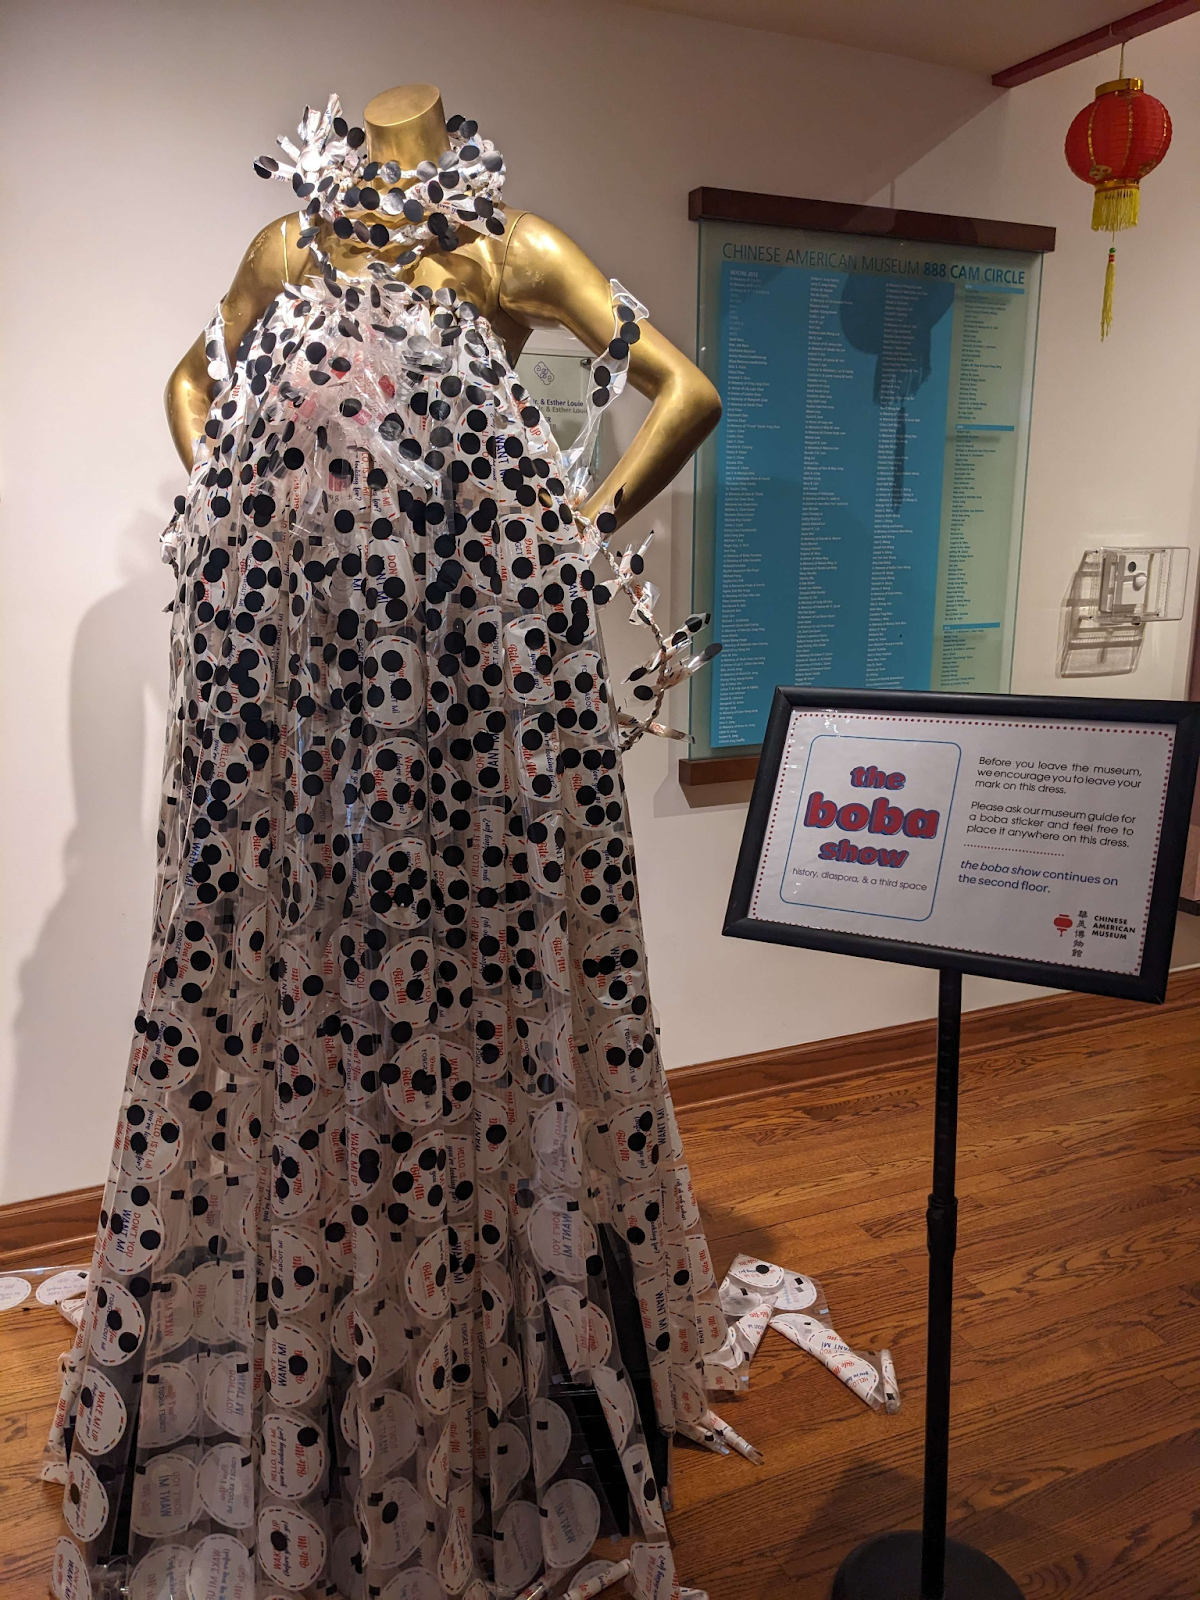 “Numa^ia to revive”, created by Roldy Aguera Ablao showing the dress covered in stickers from previous visitors of the exhibit.